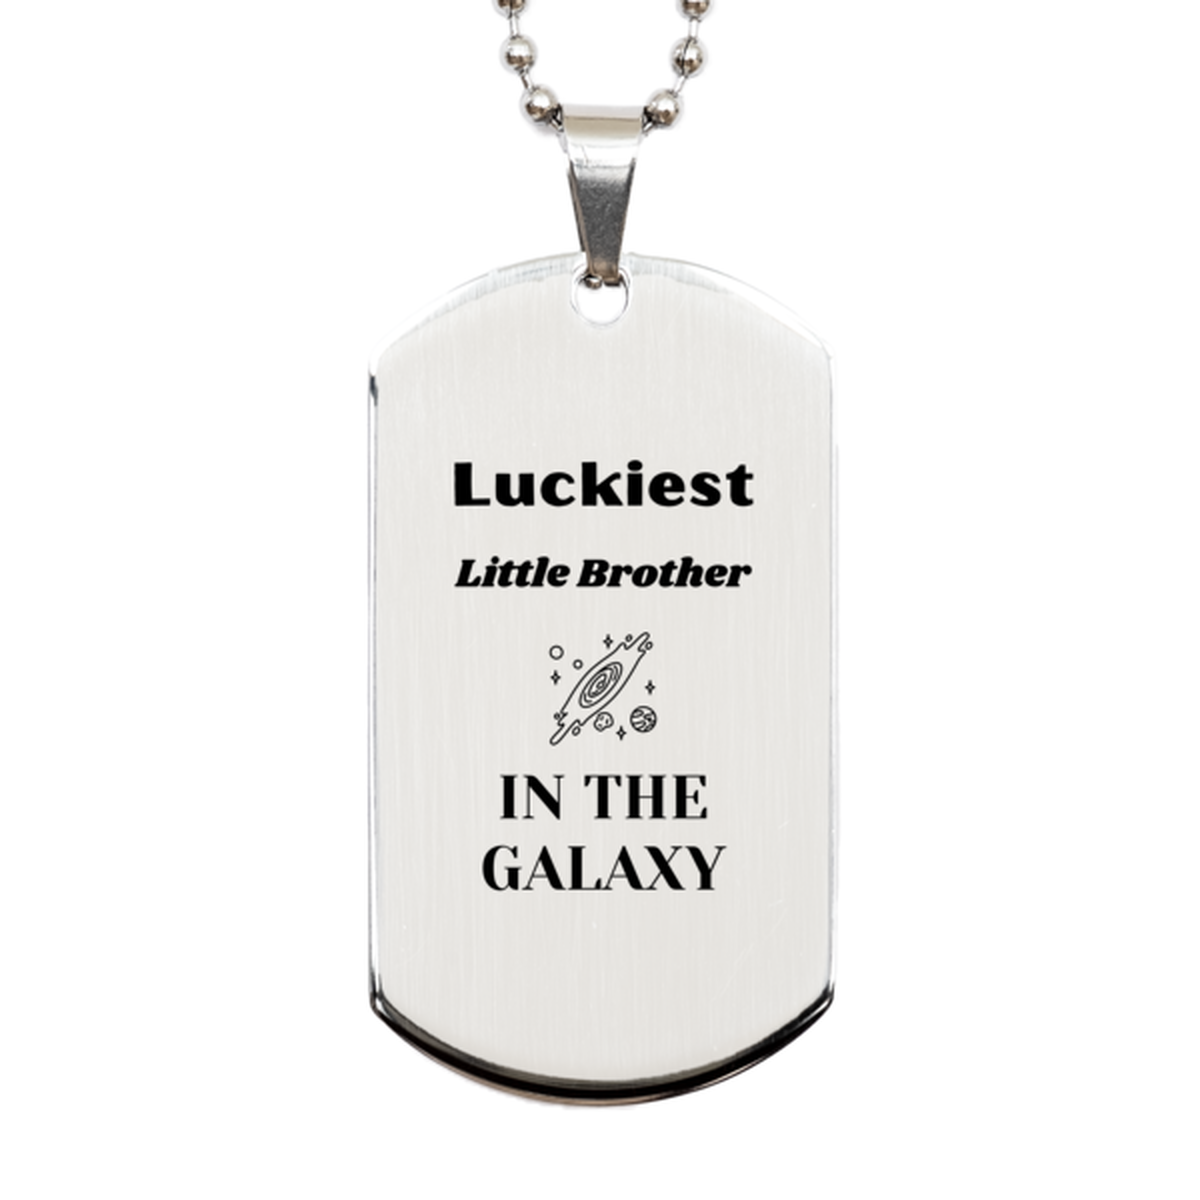 Luckiest Little Brother in the Galaxy, To My Little Brother Engraved Gifts, Christmas Little Brother Silver Dog Tag Gifts, X-mas Birthday Unique Gifts For Little Brother Men Women